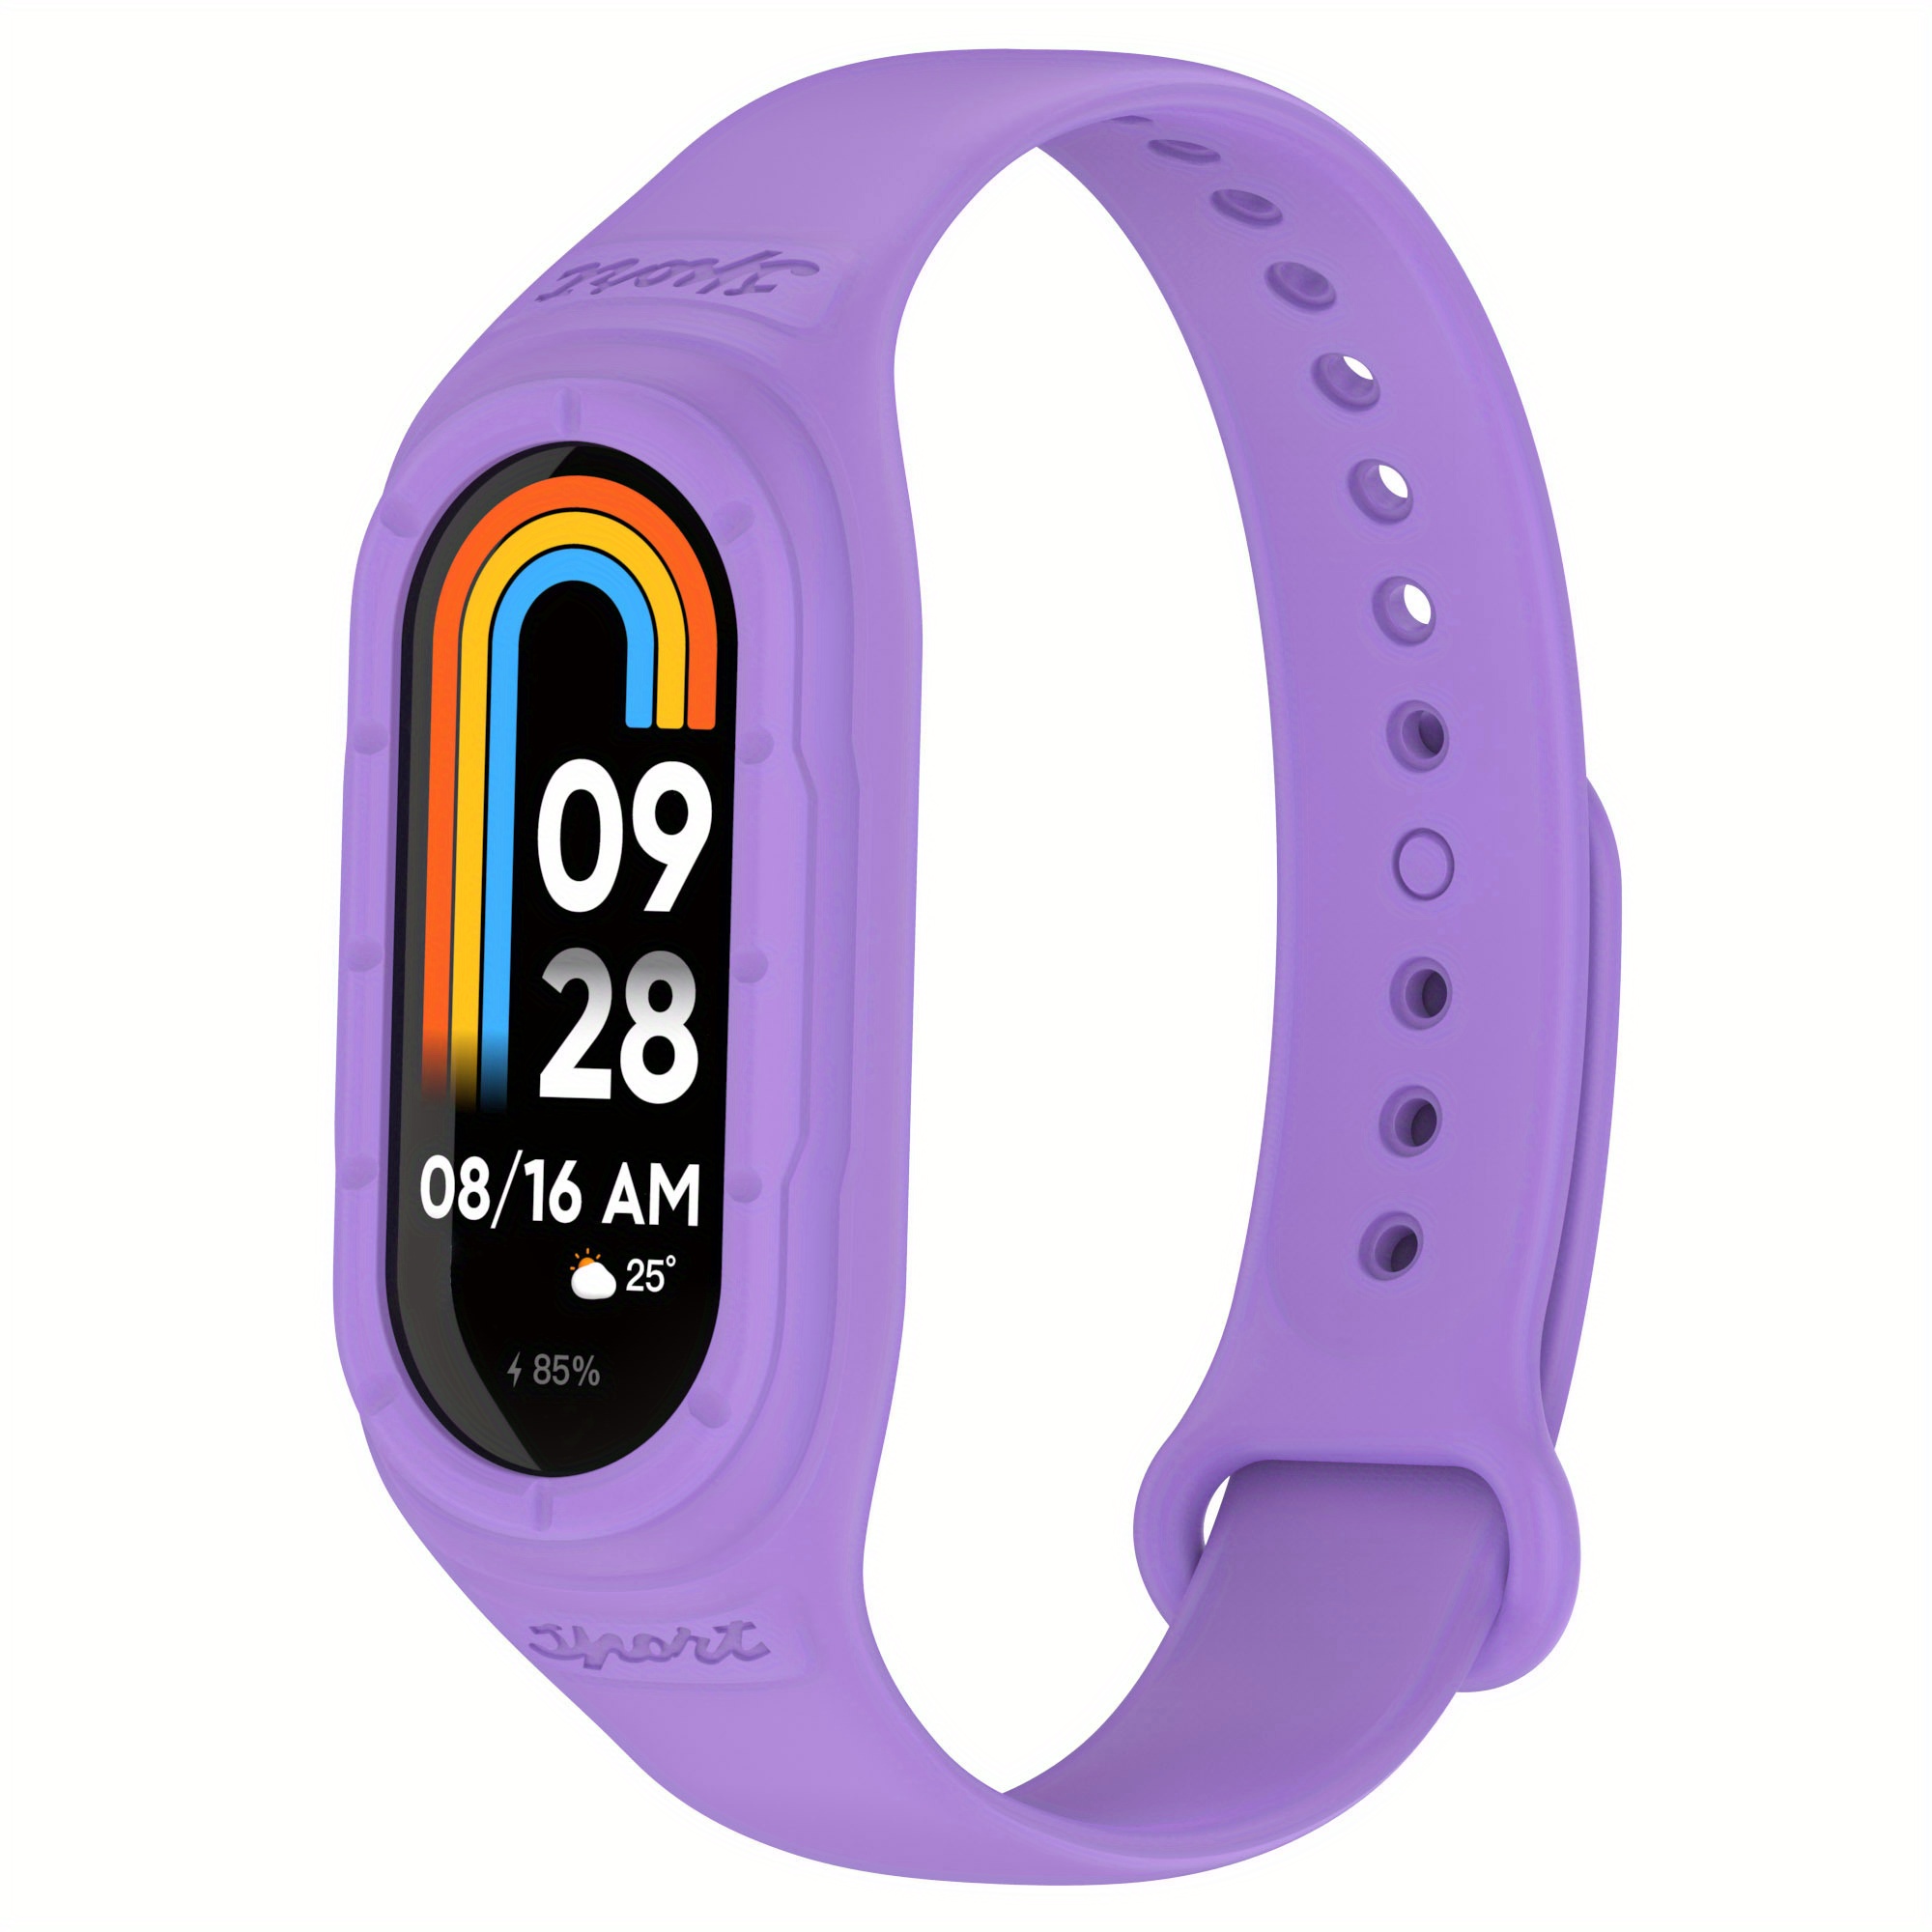 Xiaomi Smart Band 8. Another new product from Xiaomi is the…